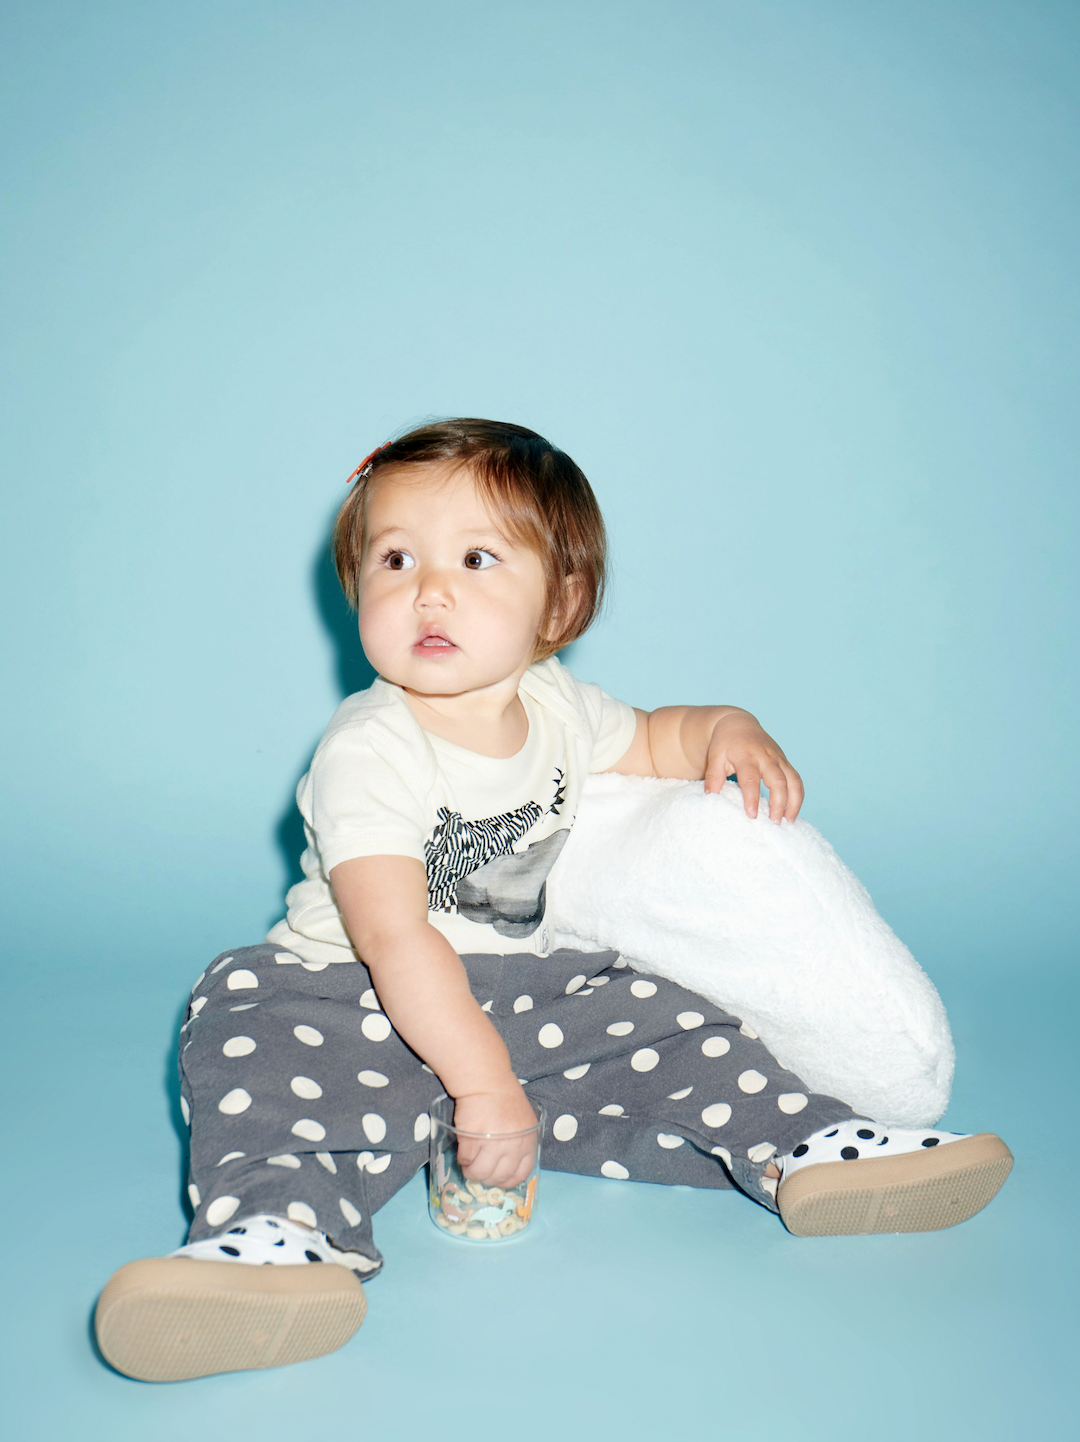 A toddler sitting with a pair of mary jane sneakers with black dots on a white background